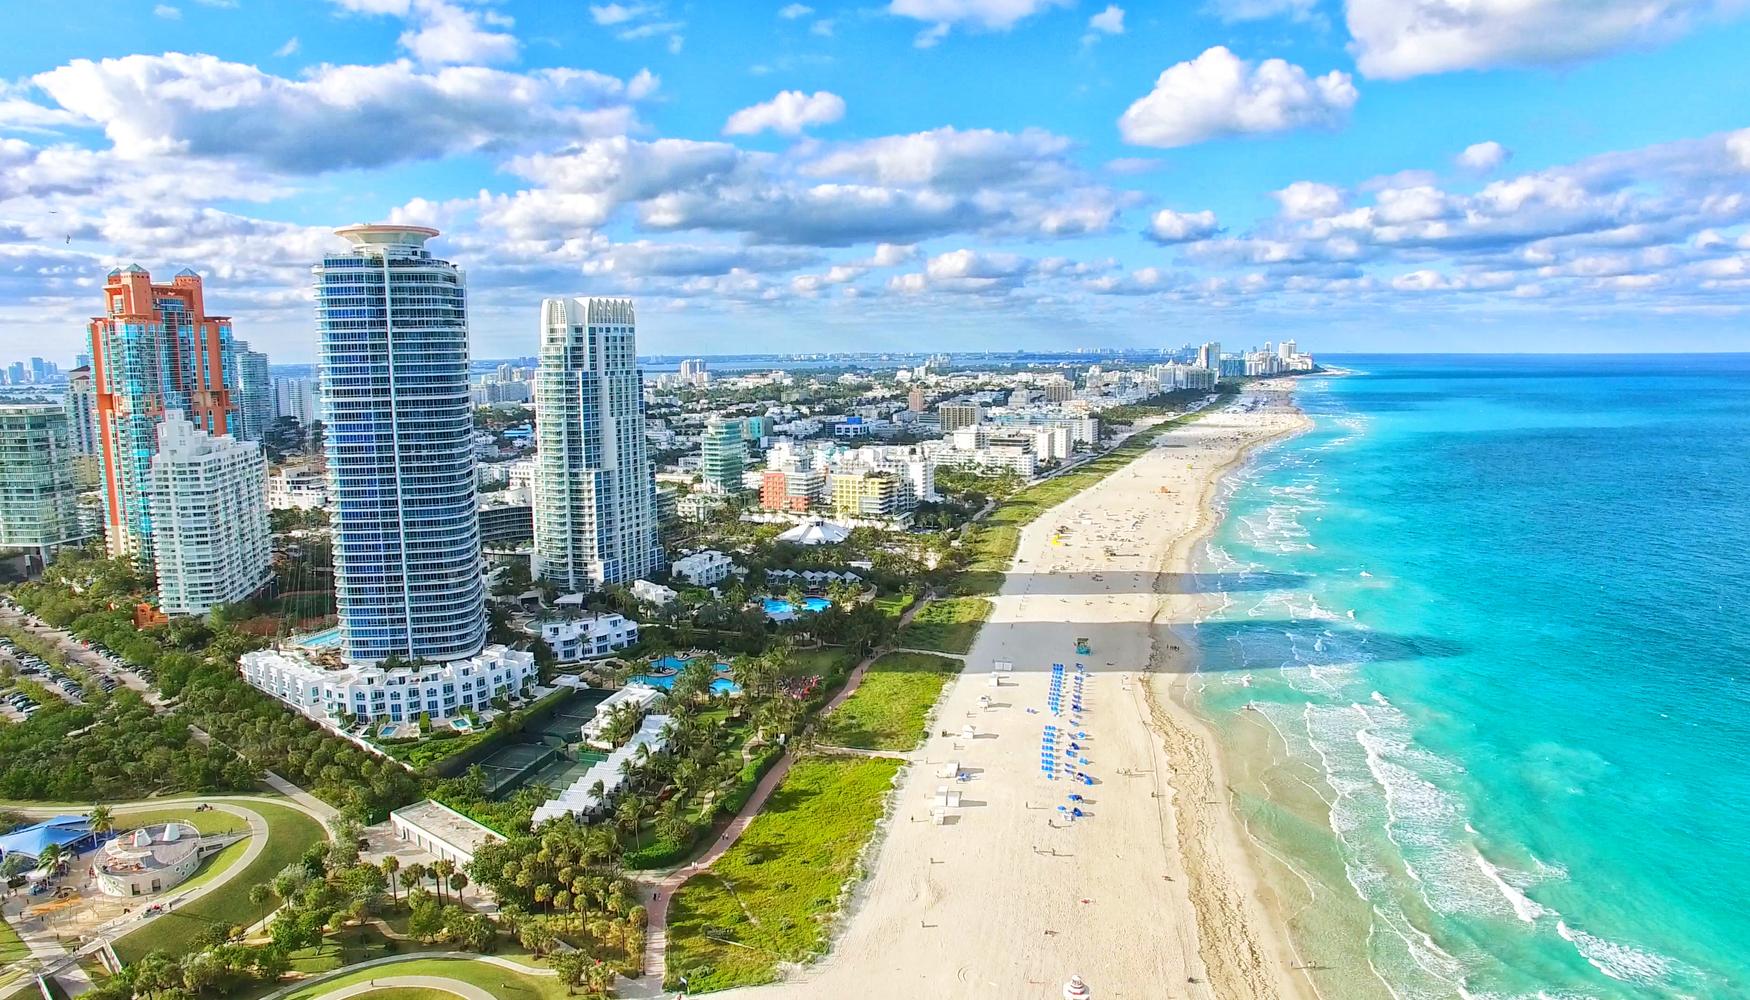 Miami Beach Vacation Packages from $10 - Search Flight+Hotel on